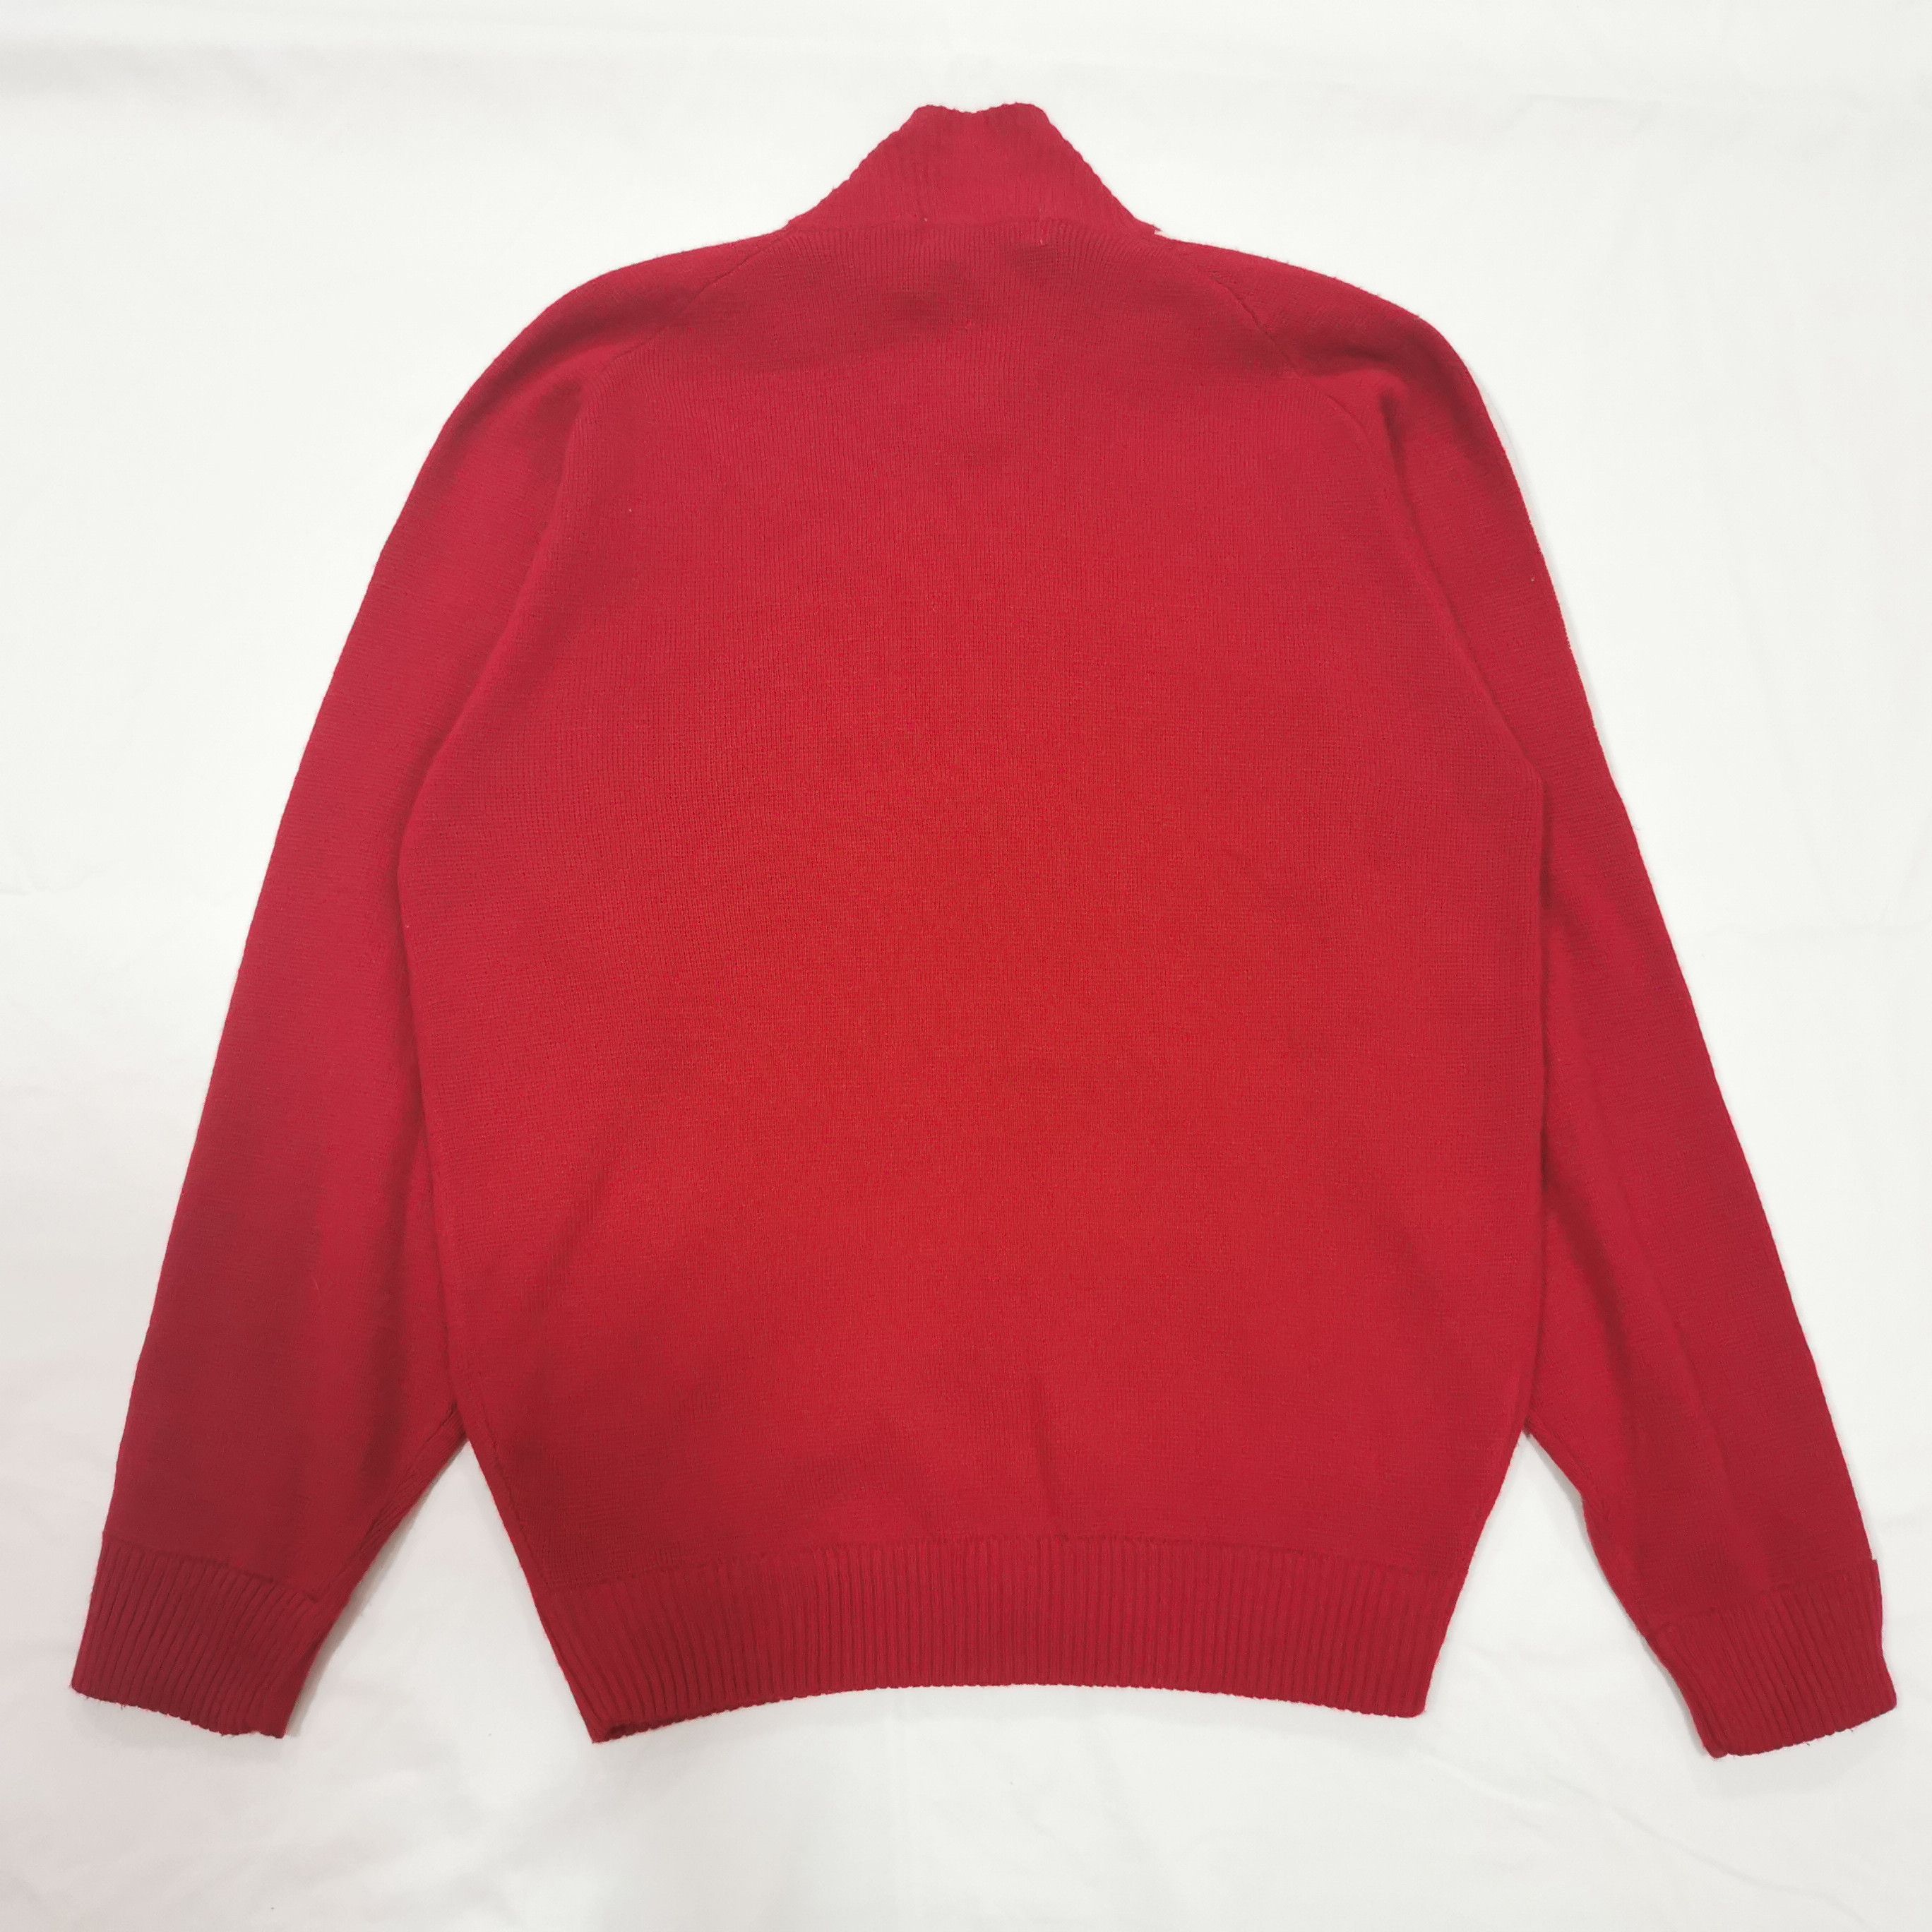 Vintage Vision Street Wear Knitted Sweaters - 2